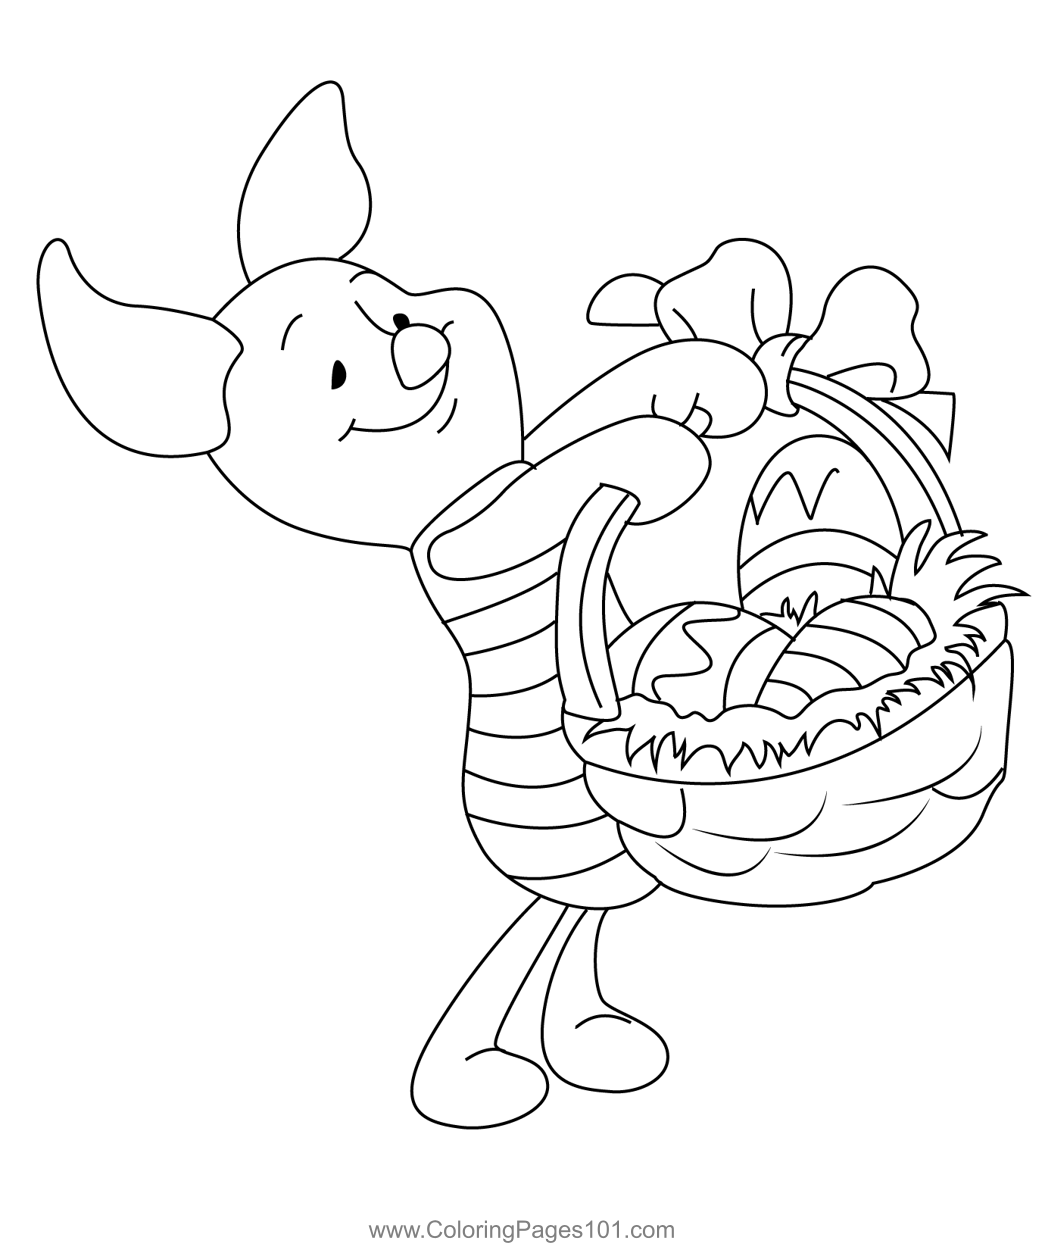 Piglet With Easter Basket Coloring Page for Kids - Free Easter ...